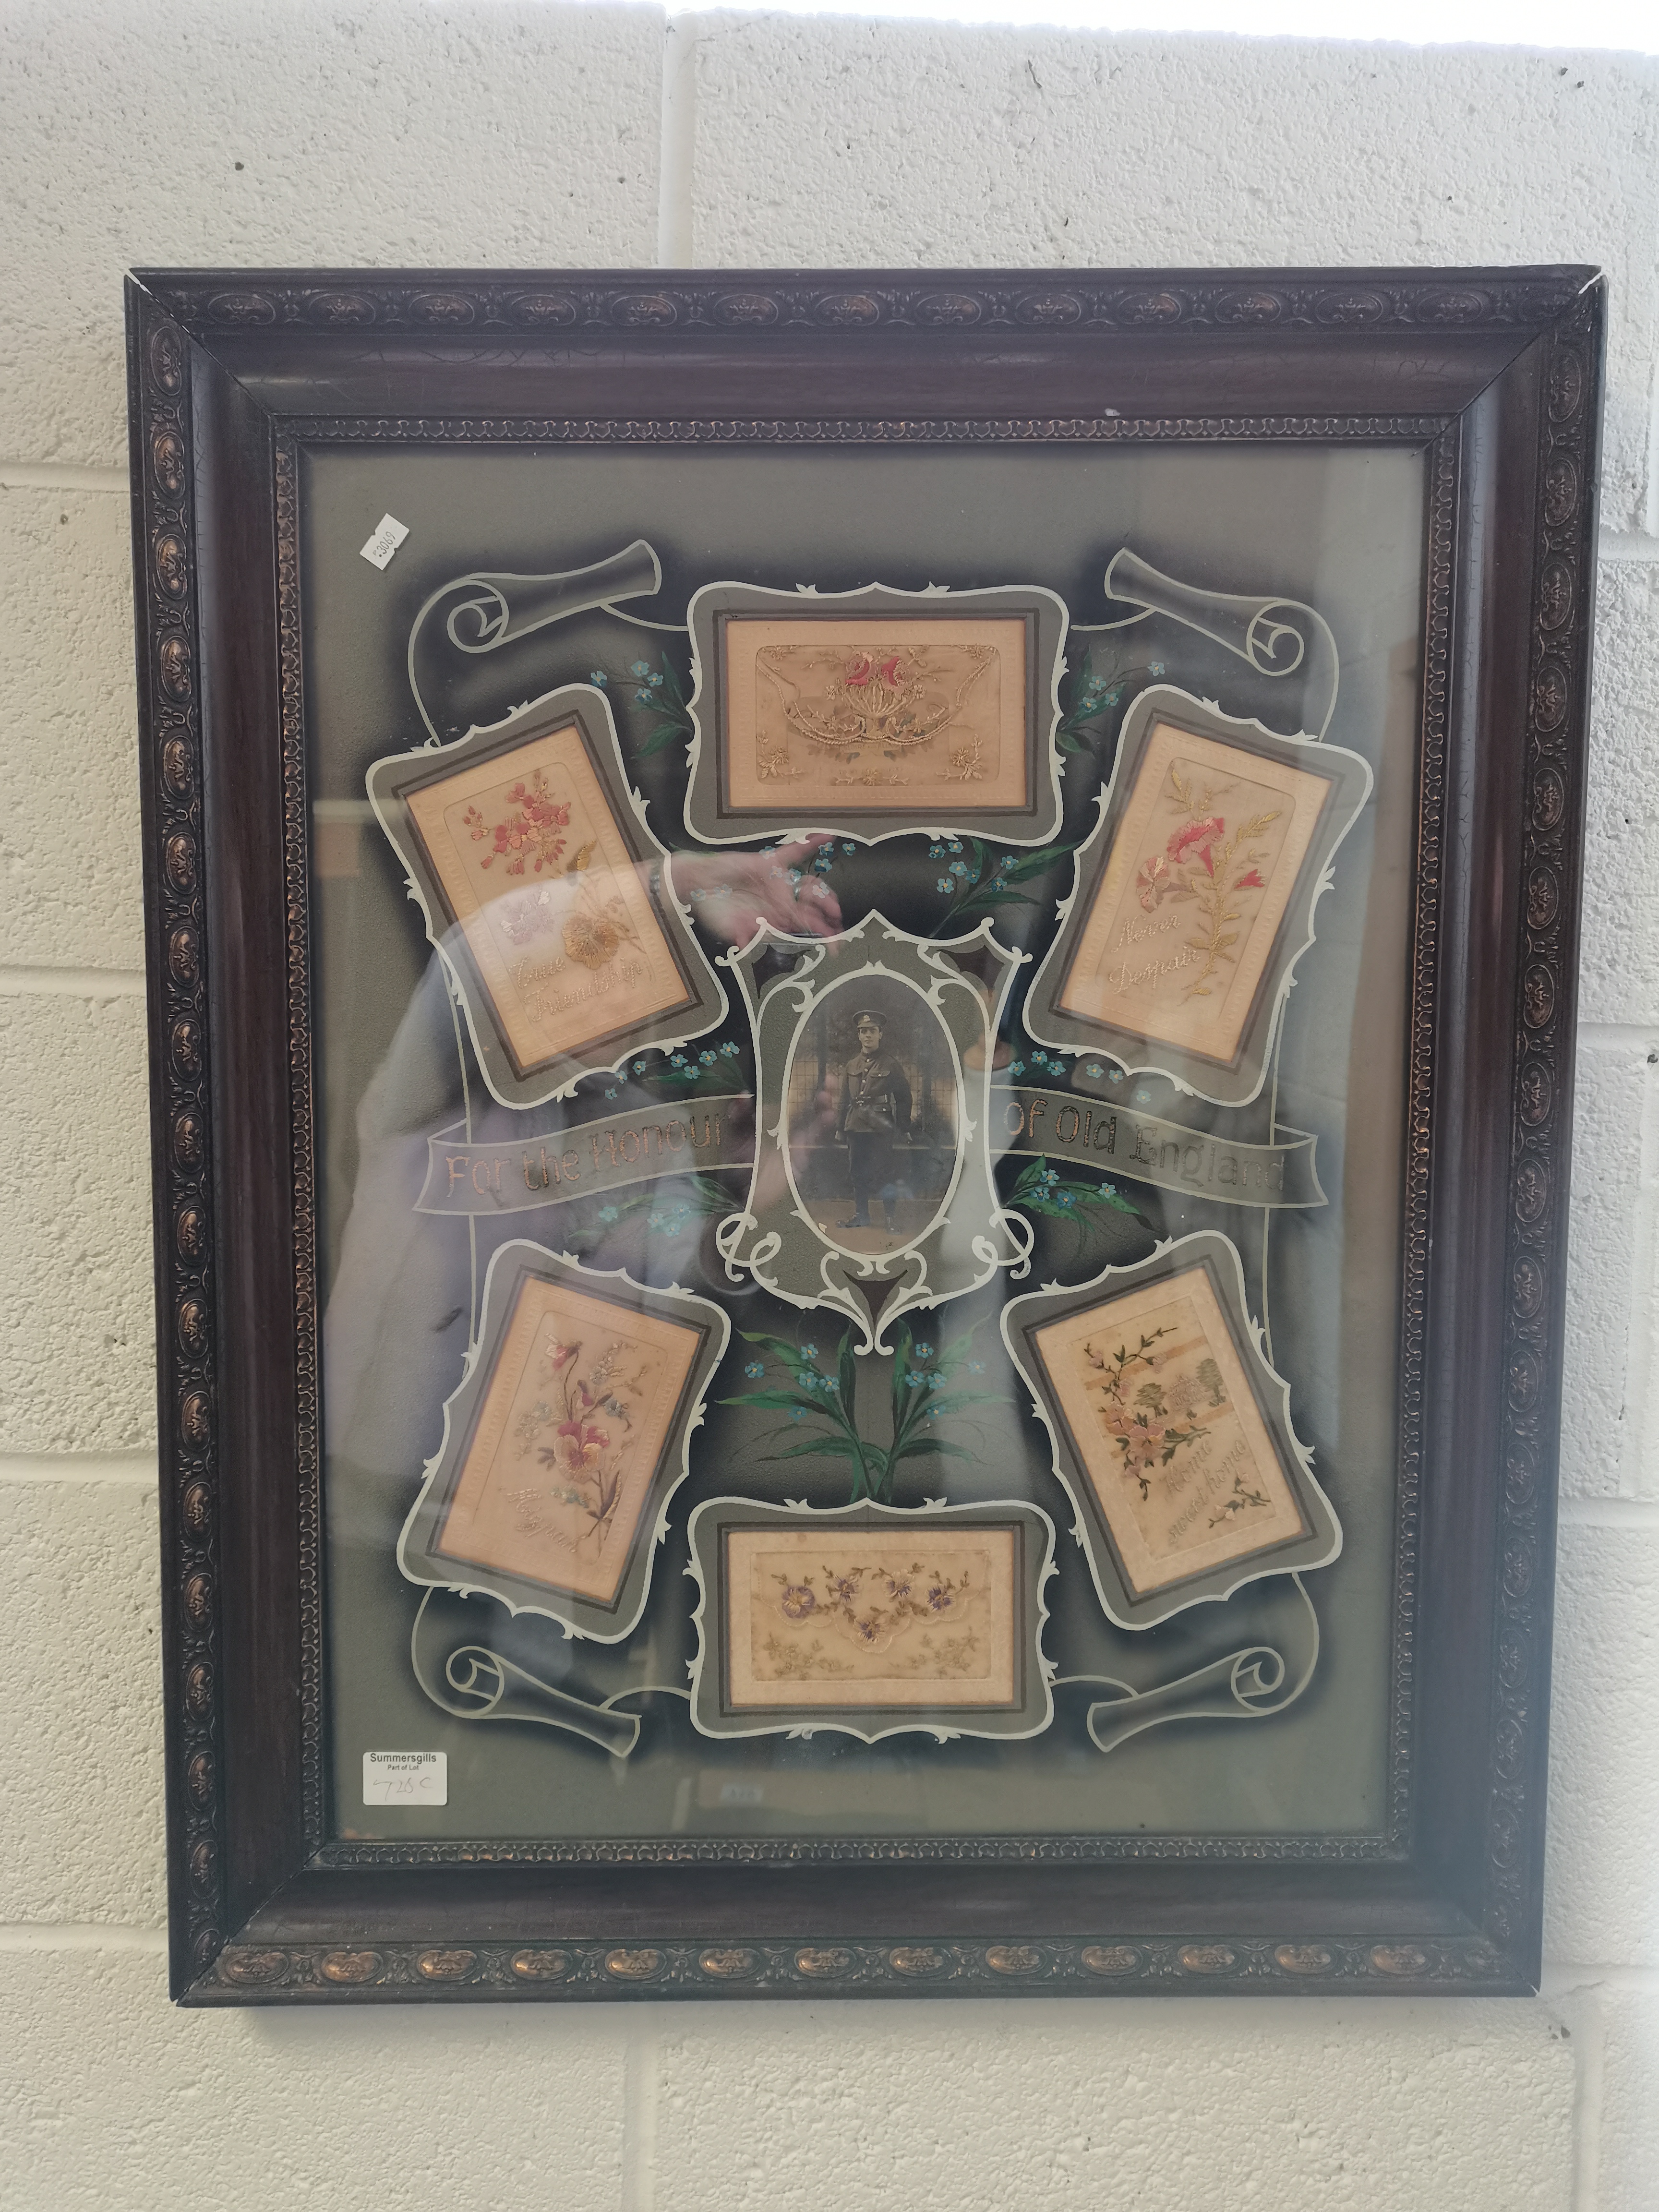 Antique framed silk embroideries in commemorative setting - Image 2 of 2